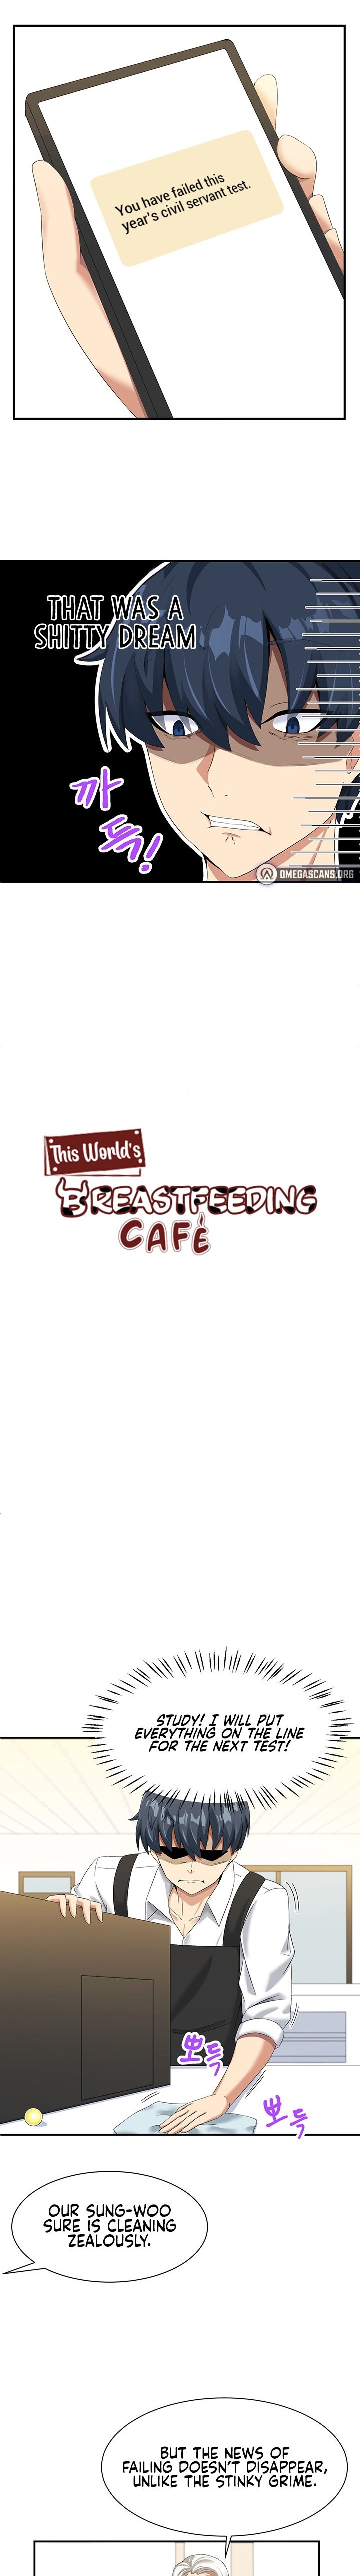 This World’s Breastfeeding Cafe - Chapter 1 Page 2